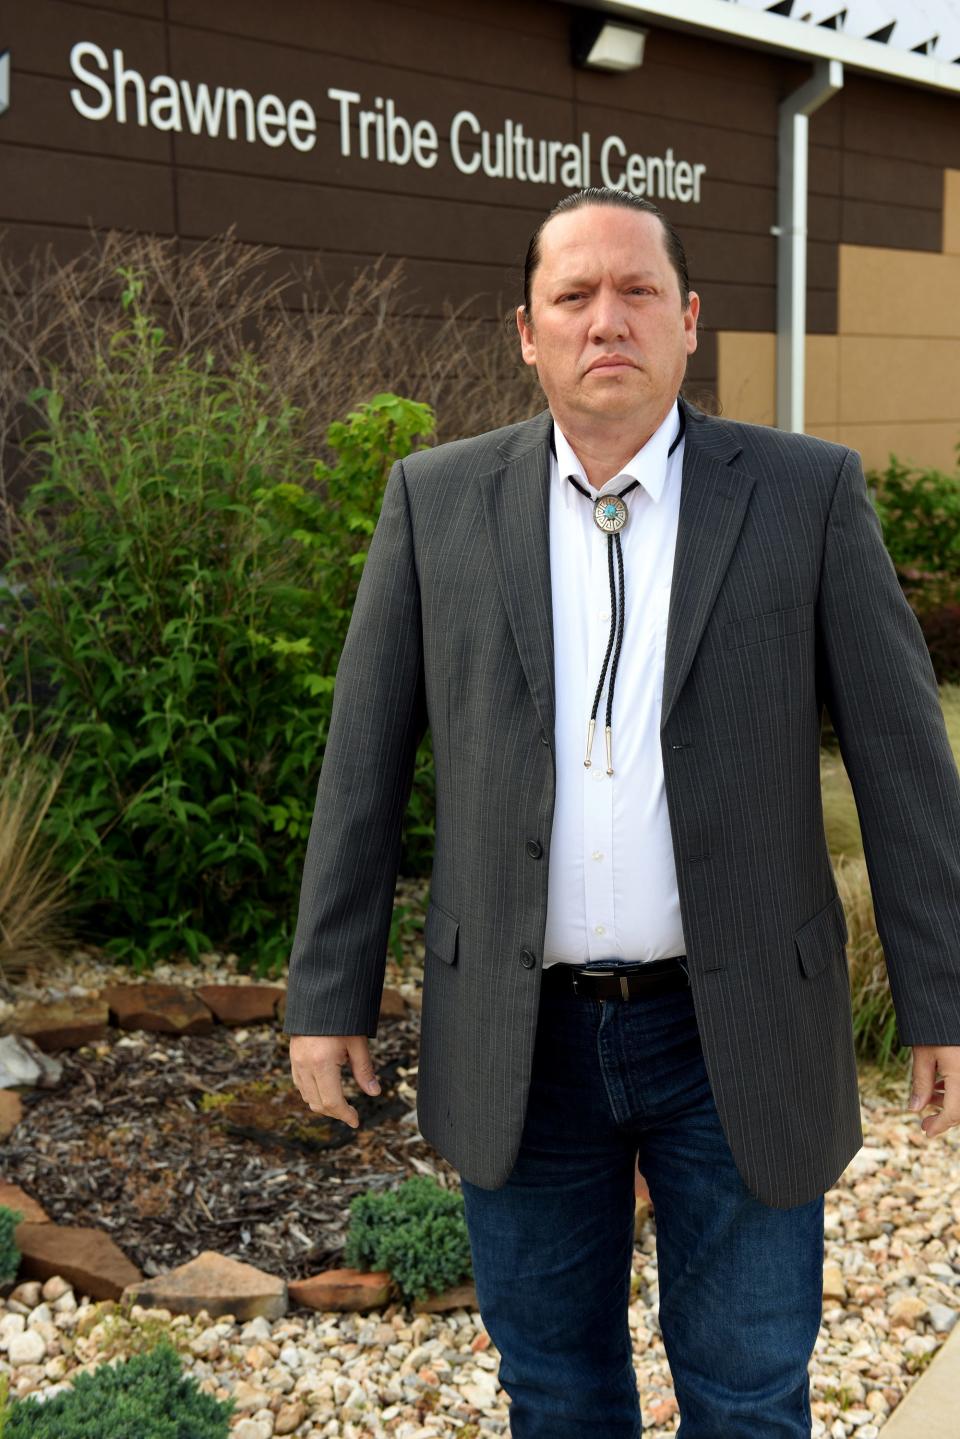 Shawnee Tribe of Oklahoma Chief Ben Barnes leads a nation of more than 3,100 people. A federal dataset recorded the population of the Miami-based tribe as zero, leading to the minimum CARES Act relief payment and spurring a federal lawsuit.  